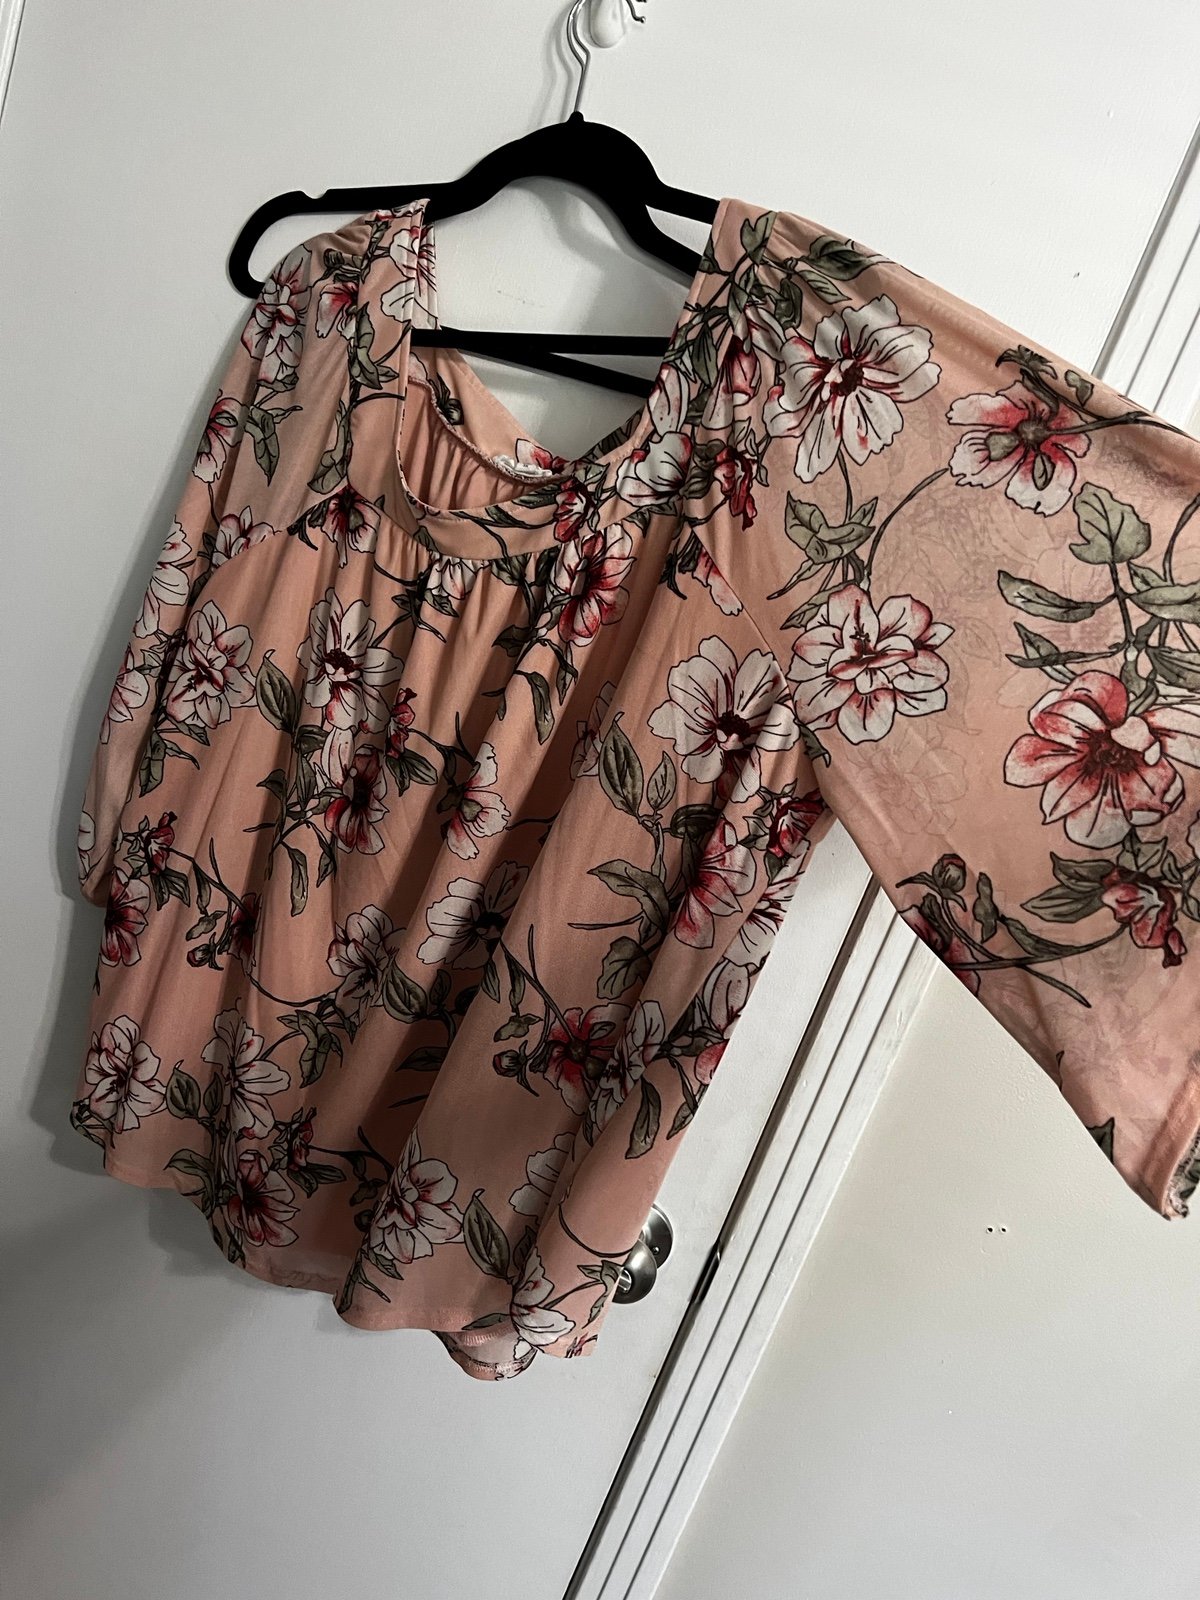 Exclusive Women’s floral top blouse phWvrzwOs Low Price